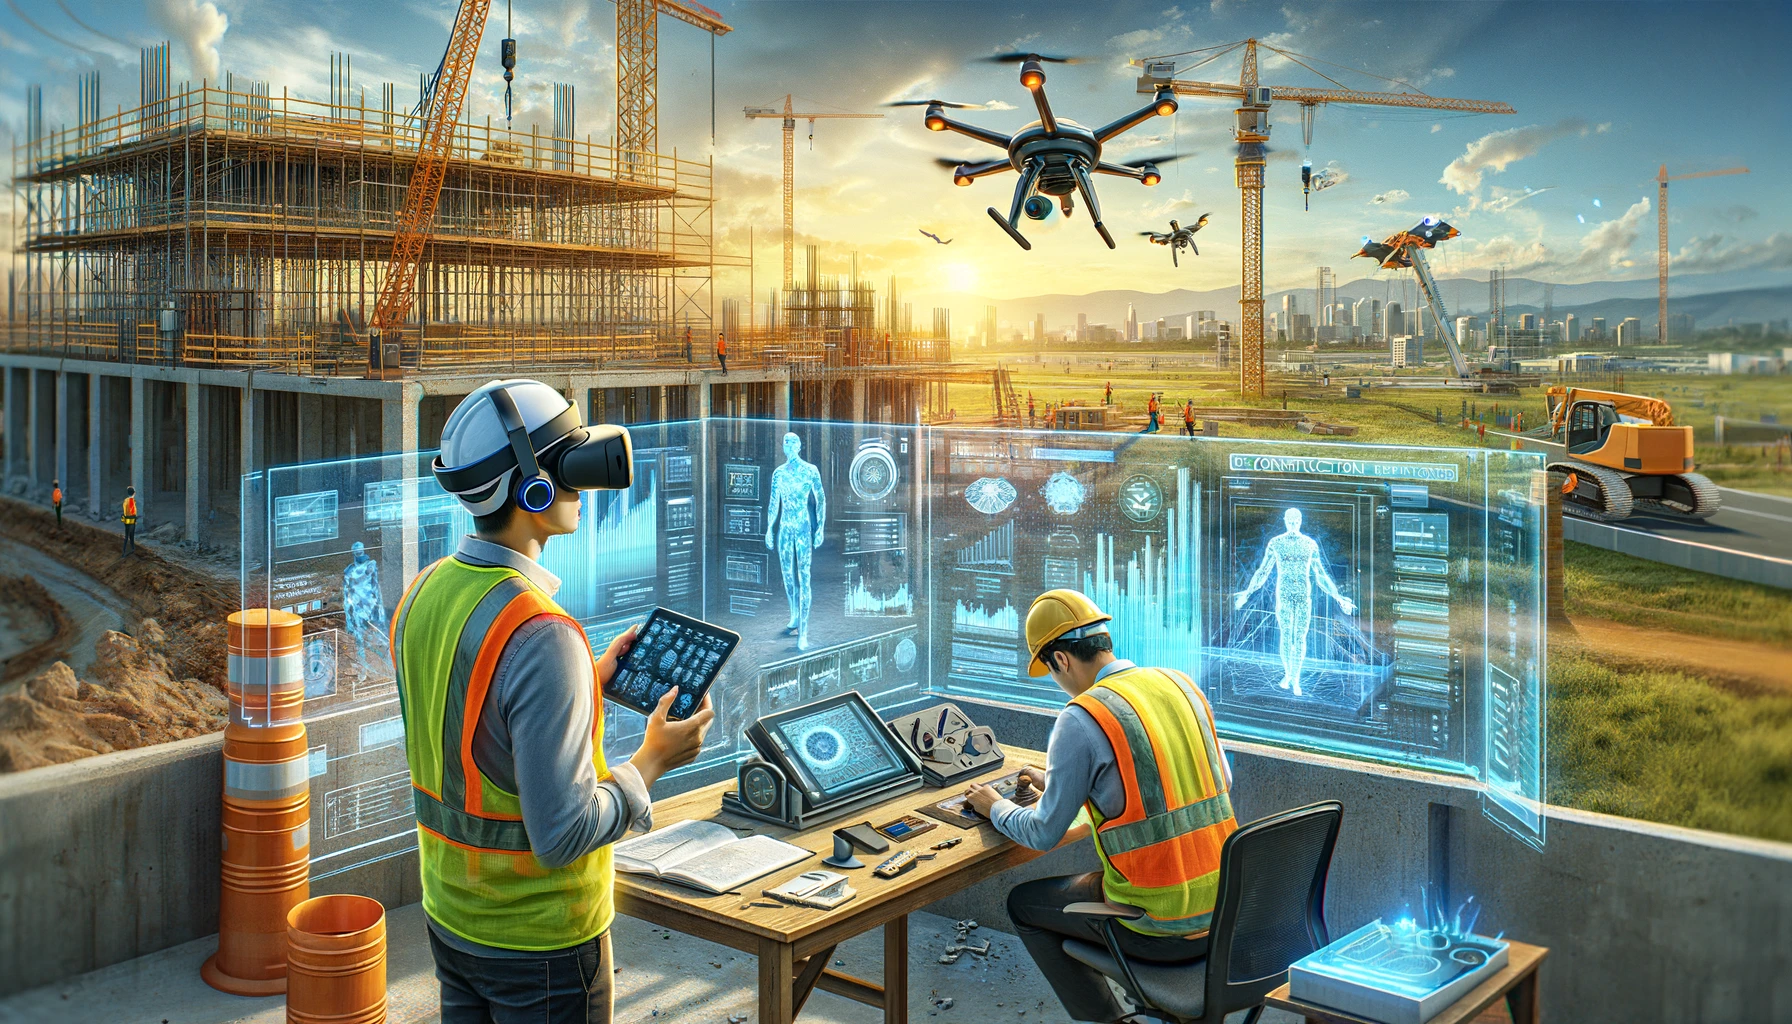 illustrating a modern construction site where AI and technology are integrated into daily operations. This painting aligns with the requested dimensions and features a realistic depiction of construction workers using advanced technology.